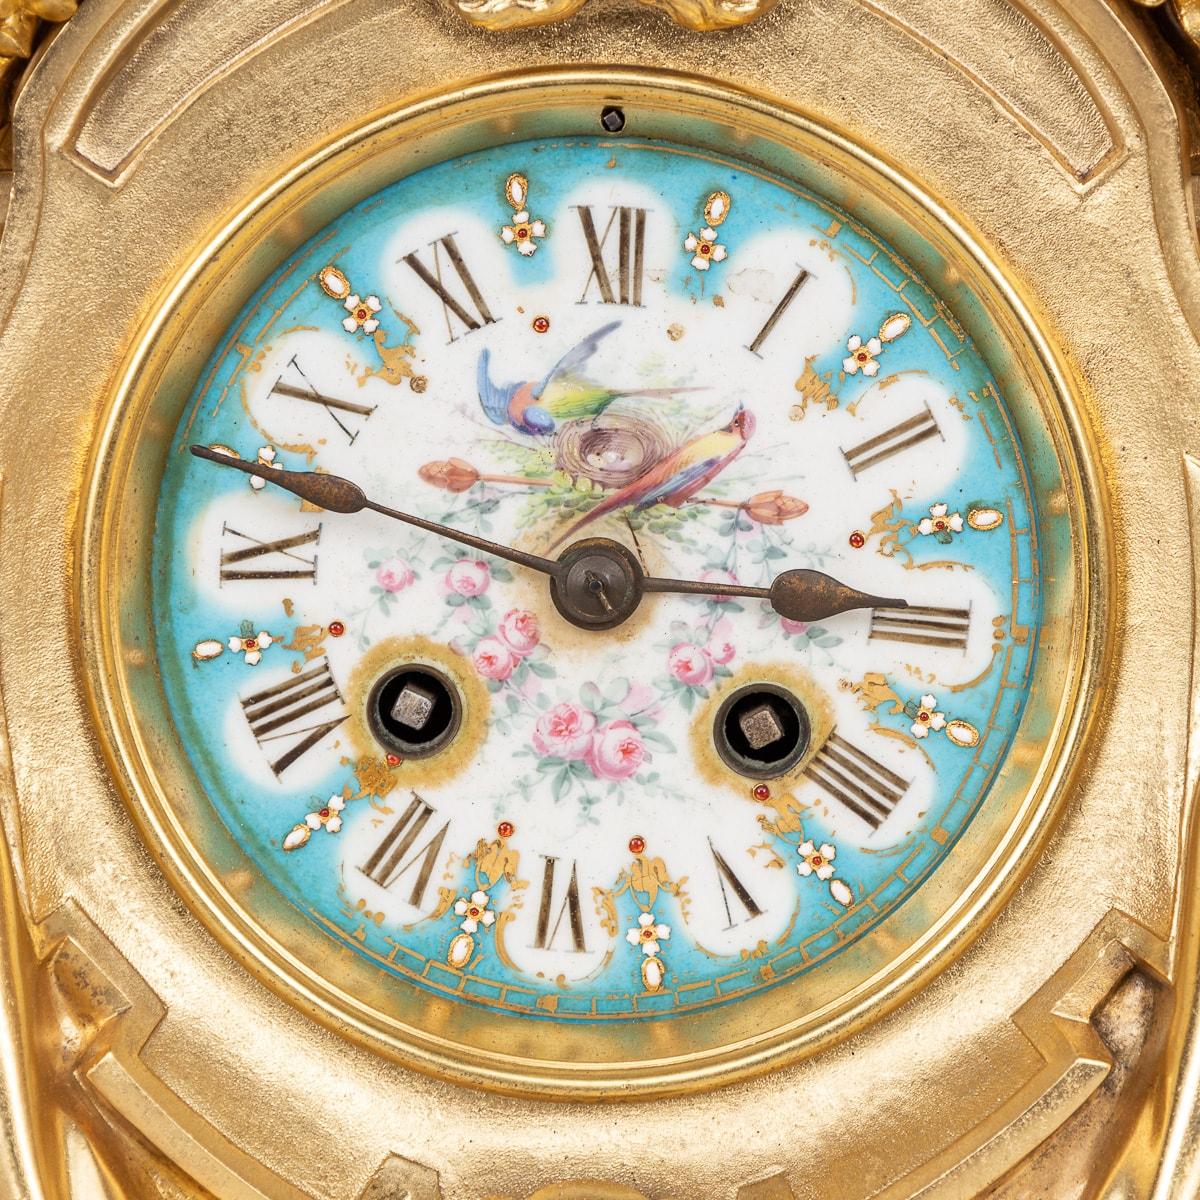 19th Century French Ormolu Mounted Sevres Style Porcelain Mantle Clock c.1870 For Sale 11